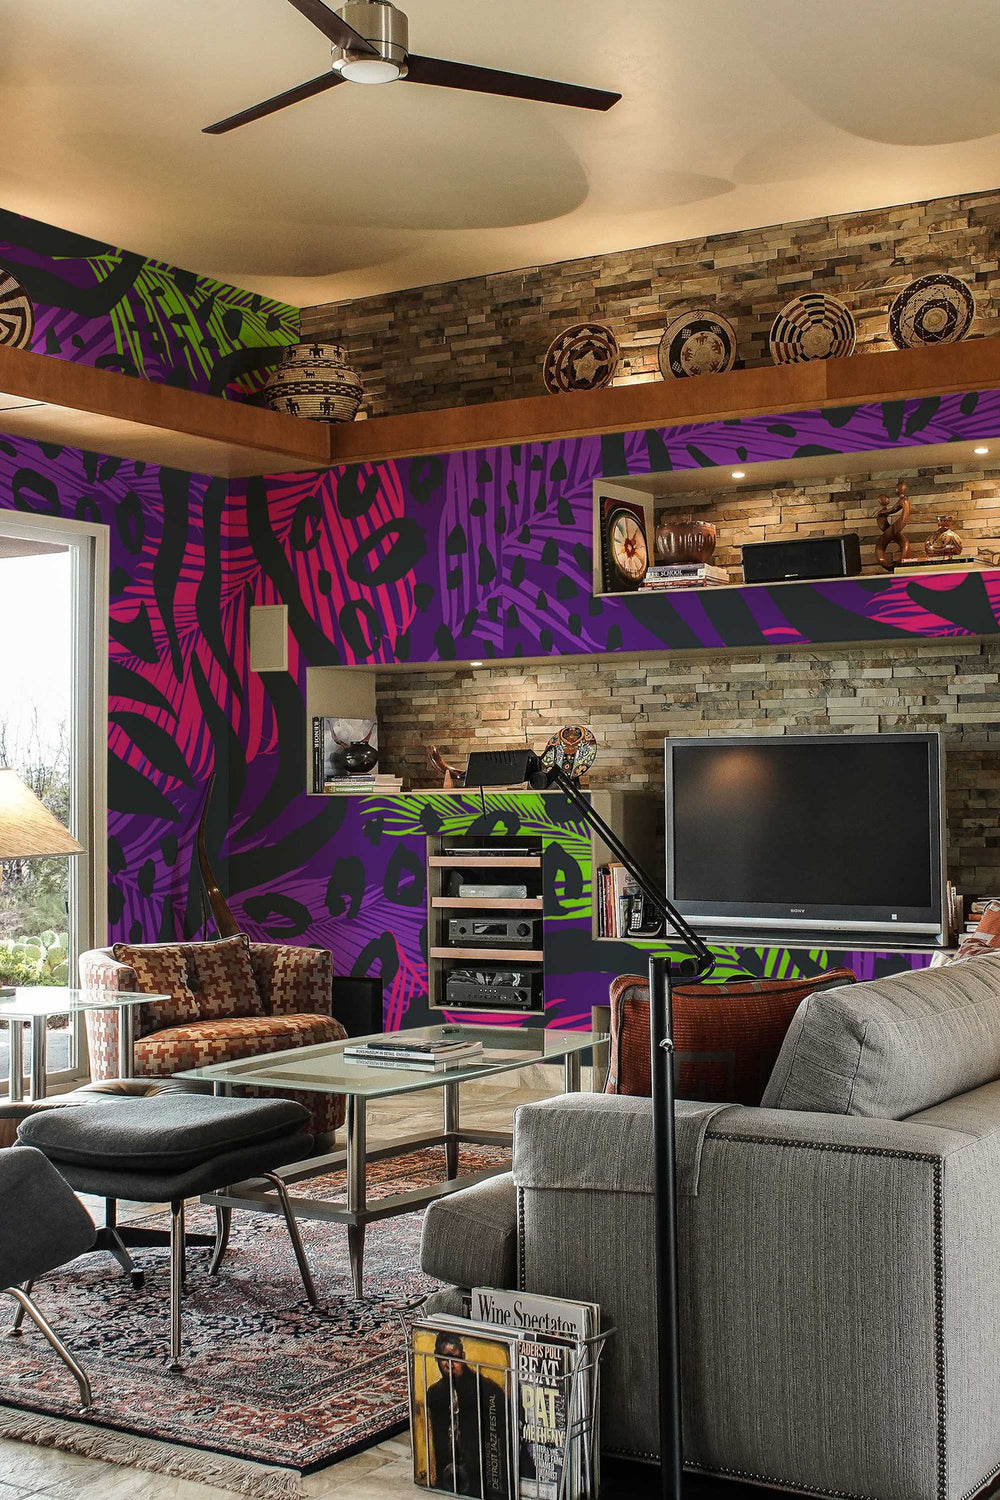 Interior of a modern living room featuring a bold purple abstract mural on the wall, with stylish furniture and decor.